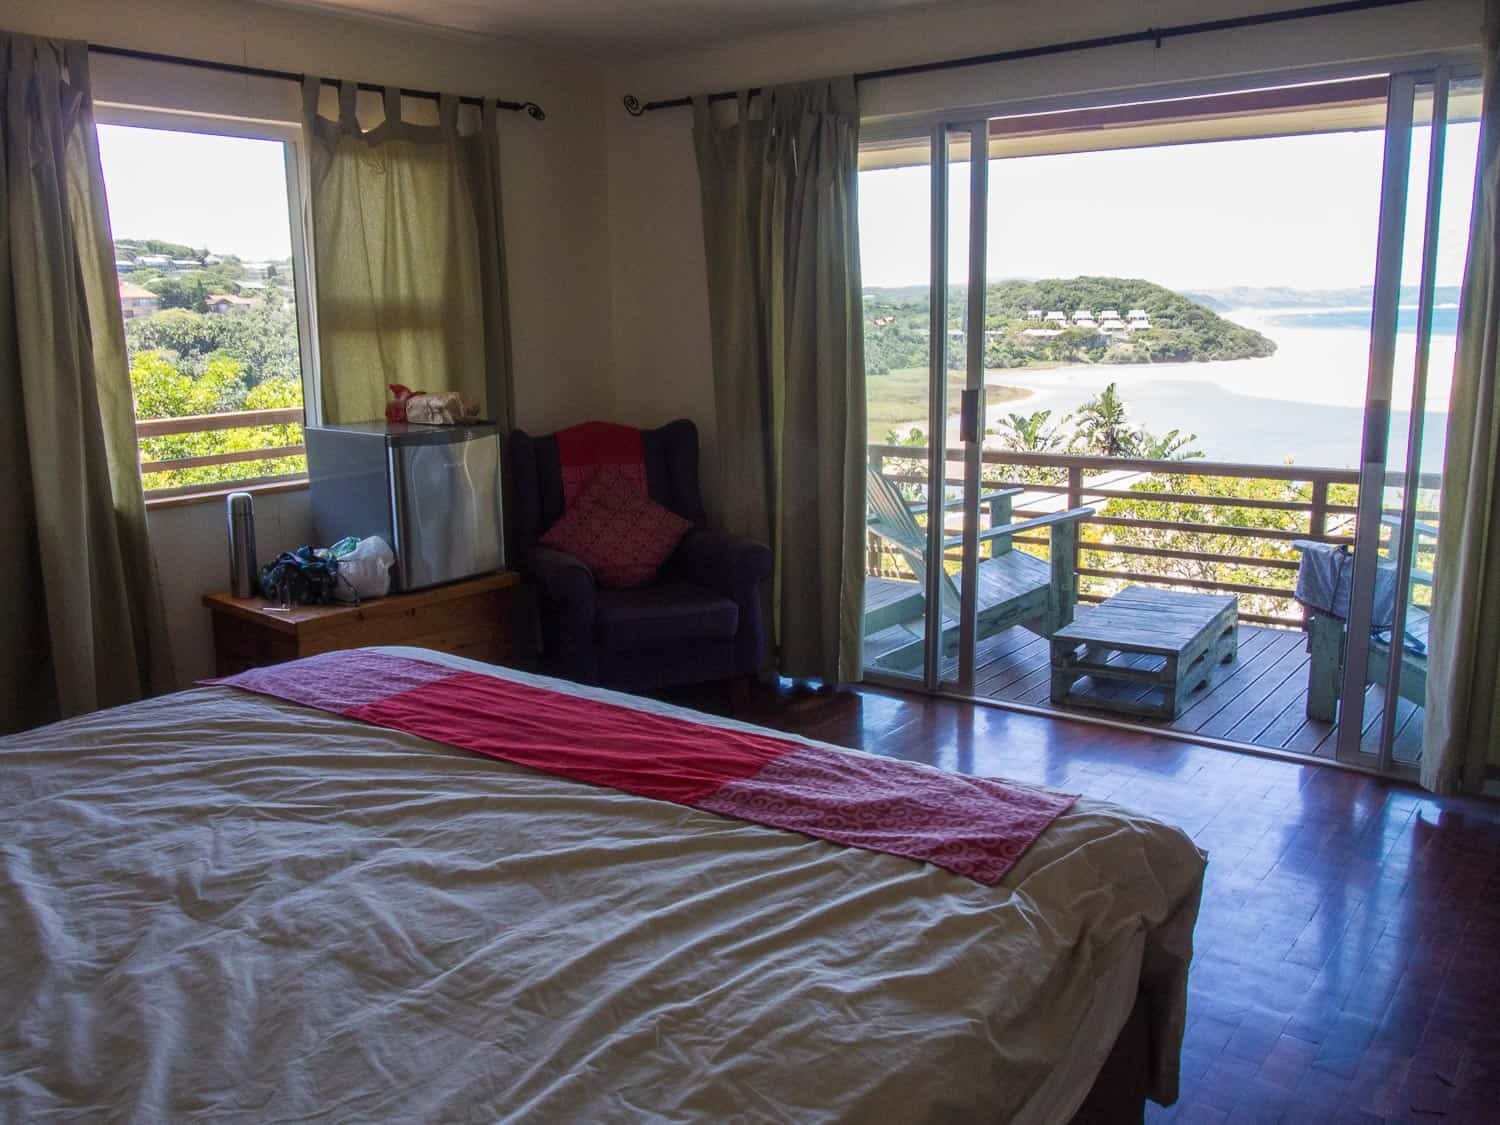 Our sea view room at Buccaneers, Chintsa, South Africa